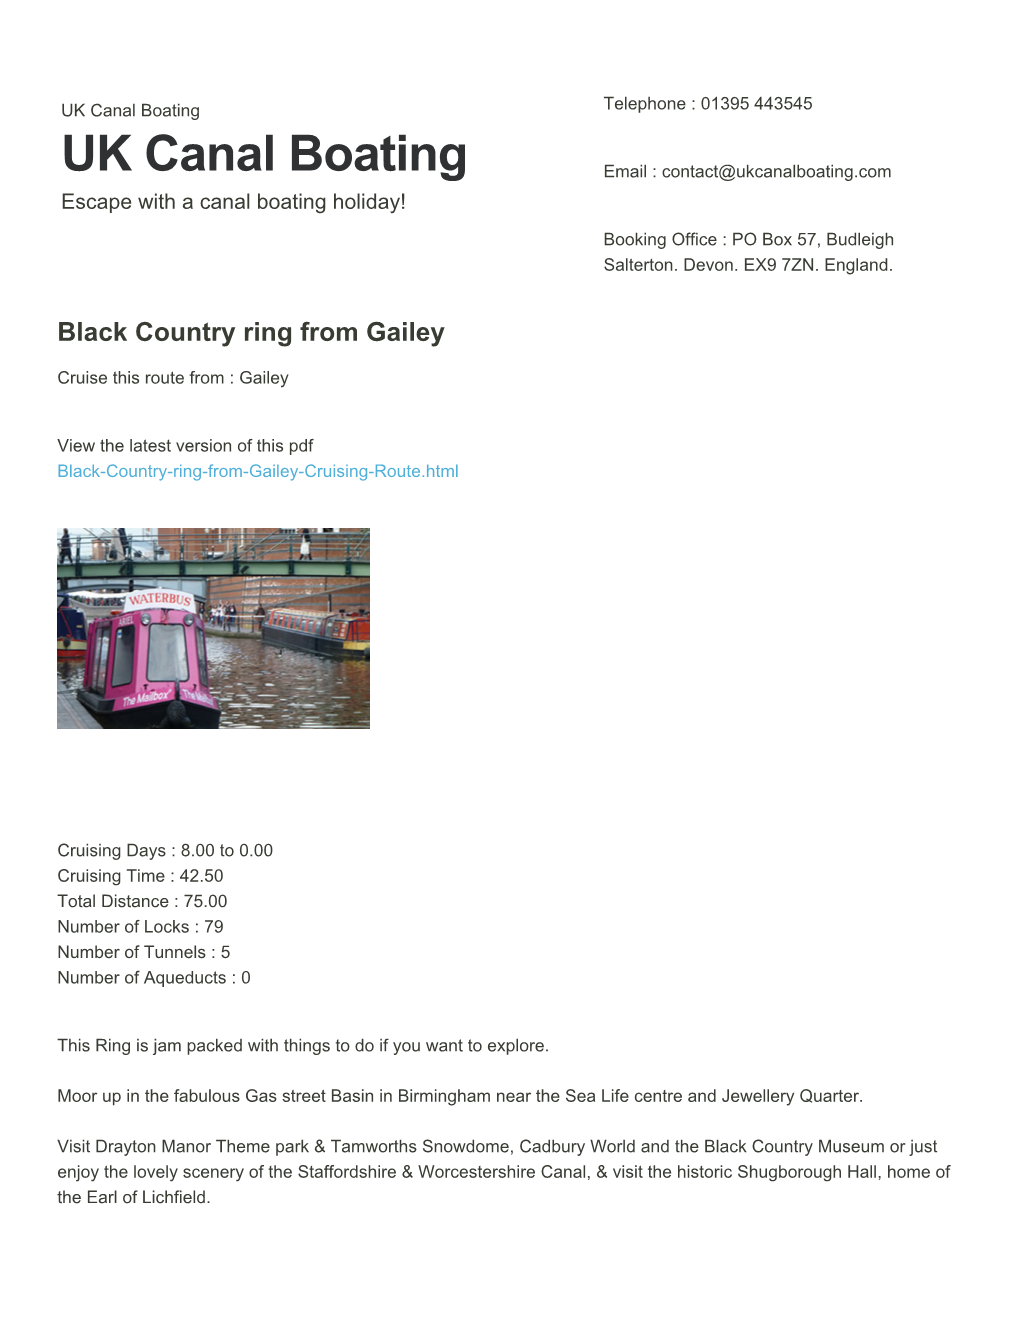 Black Country Ring from Gailey | UK Canal Boating